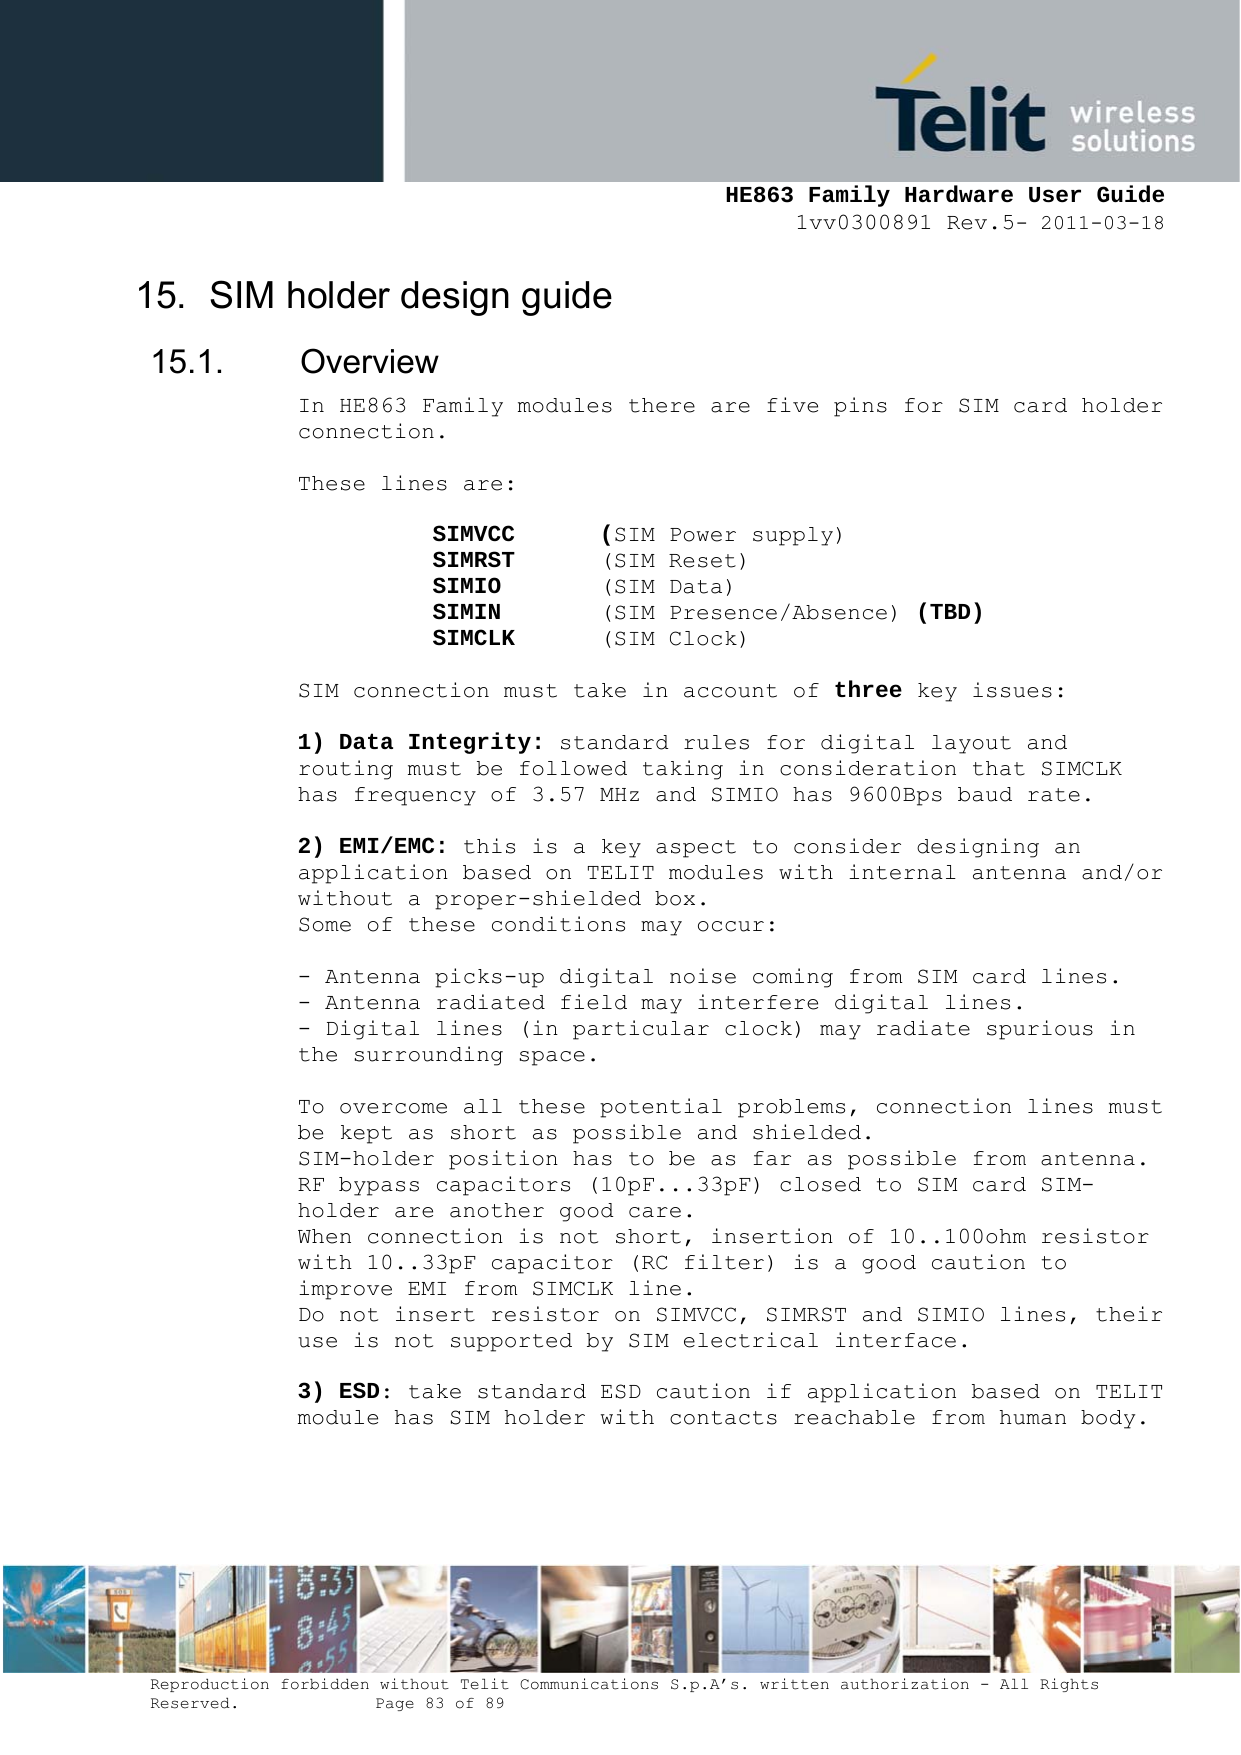     HE863 Family Hardware User Guide 1vv0300891 Rev.5- 2011-03-18    Reproduction forbidden without Telit Communications S.p.A’s. written authorization - All Rights Reserved.    Page 83 of 89  15.  SIM holder design guide 15.1. Overview In HE863 Family modules there are five pins for SIM card holder connection.  These lines are:  SIMVCC   (SIM Power supply) SIMRST   (SIM Reset) SIMIO   (SIM Data) SIMIN   (SIM Presence/Absence) (TBD) SIMCLK   (SIM Clock)  SIM connection must take in account of three key issues:  1) Data Integrity: standard rules for digital layout and routing must be followed taking in consideration that SIMCLK has frequency of 3.57 MHz and SIMIO has 9600Bps baud rate.  2) EMI/EMC: this is a key aspect to consider designing an application based on TELIT modules with internal antenna and/or without a proper-shielded box. Some of these conditions may occur:  - Antenna picks-up digital noise coming from SIM card lines. - Antenna radiated field may interfere digital lines. - Digital lines (in particular clock) may radiate spurious in the surrounding space.  To overcome all these potential problems, connection lines must be kept as short as possible and shielded. SIM-holder position has to be as far as possible from antenna. RF bypass capacitors (10pF...33pF) closed to SIM card SIM-holder are another good care. When connection is not short, insertion of 10..100ohm resistor with 10..33pF capacitor (RC filter) is a good caution to improve EMI from SIMCLK line. Do not insert resistor on SIMVCC, SIMRST and SIMIO lines, their use is not supported by SIM electrical interface.  3) ESD: take standard ESD caution if application based on TELIT module has SIM holder with contacts reachable from human body.   